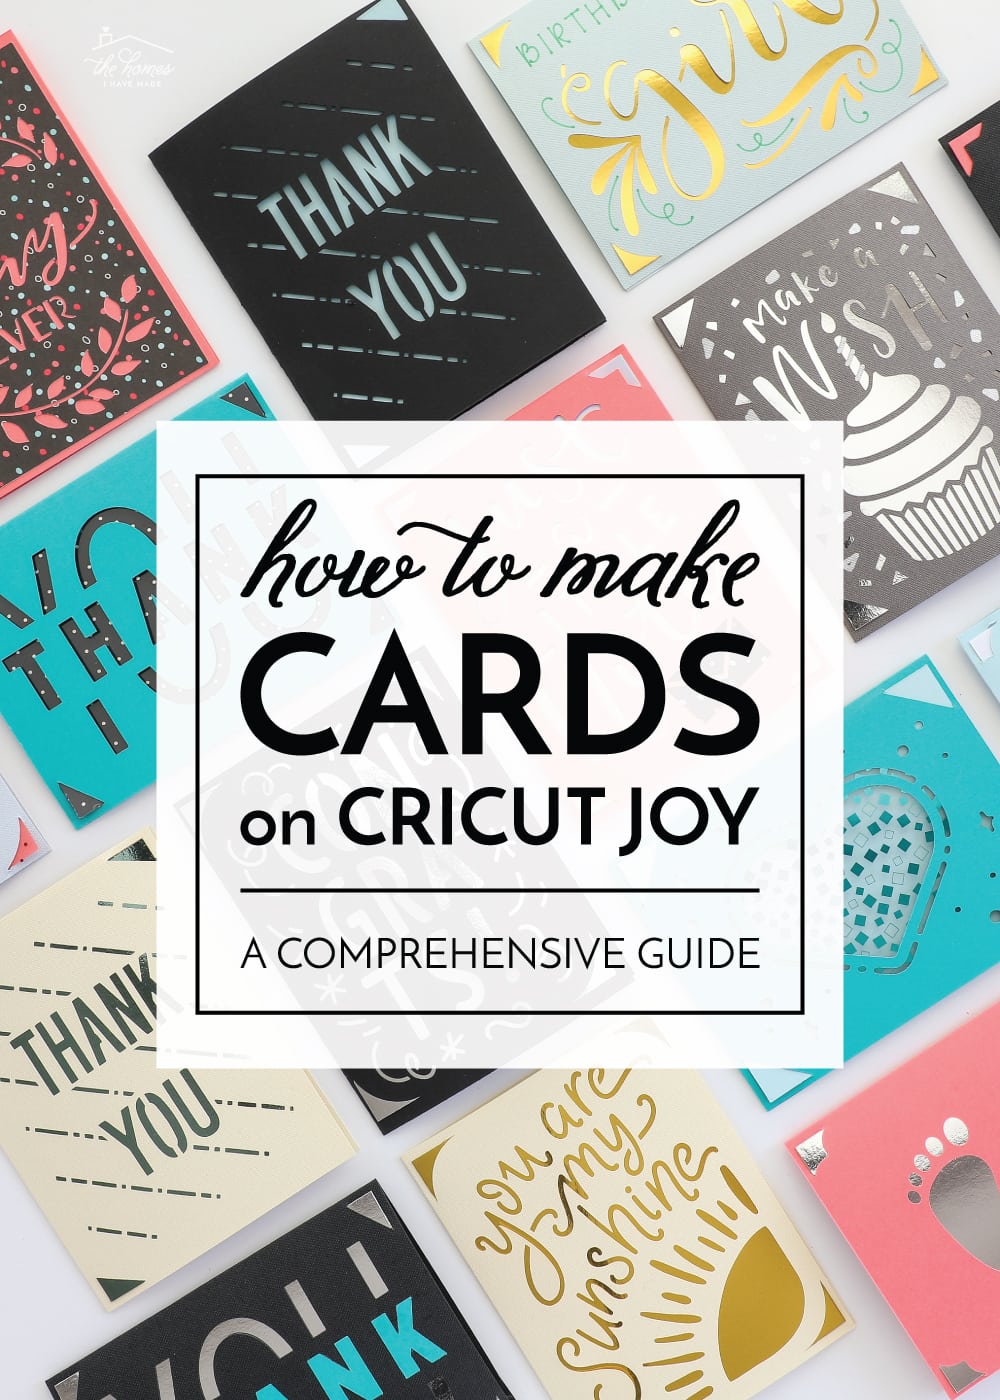 A variety of cards made with Cricut Joy machine